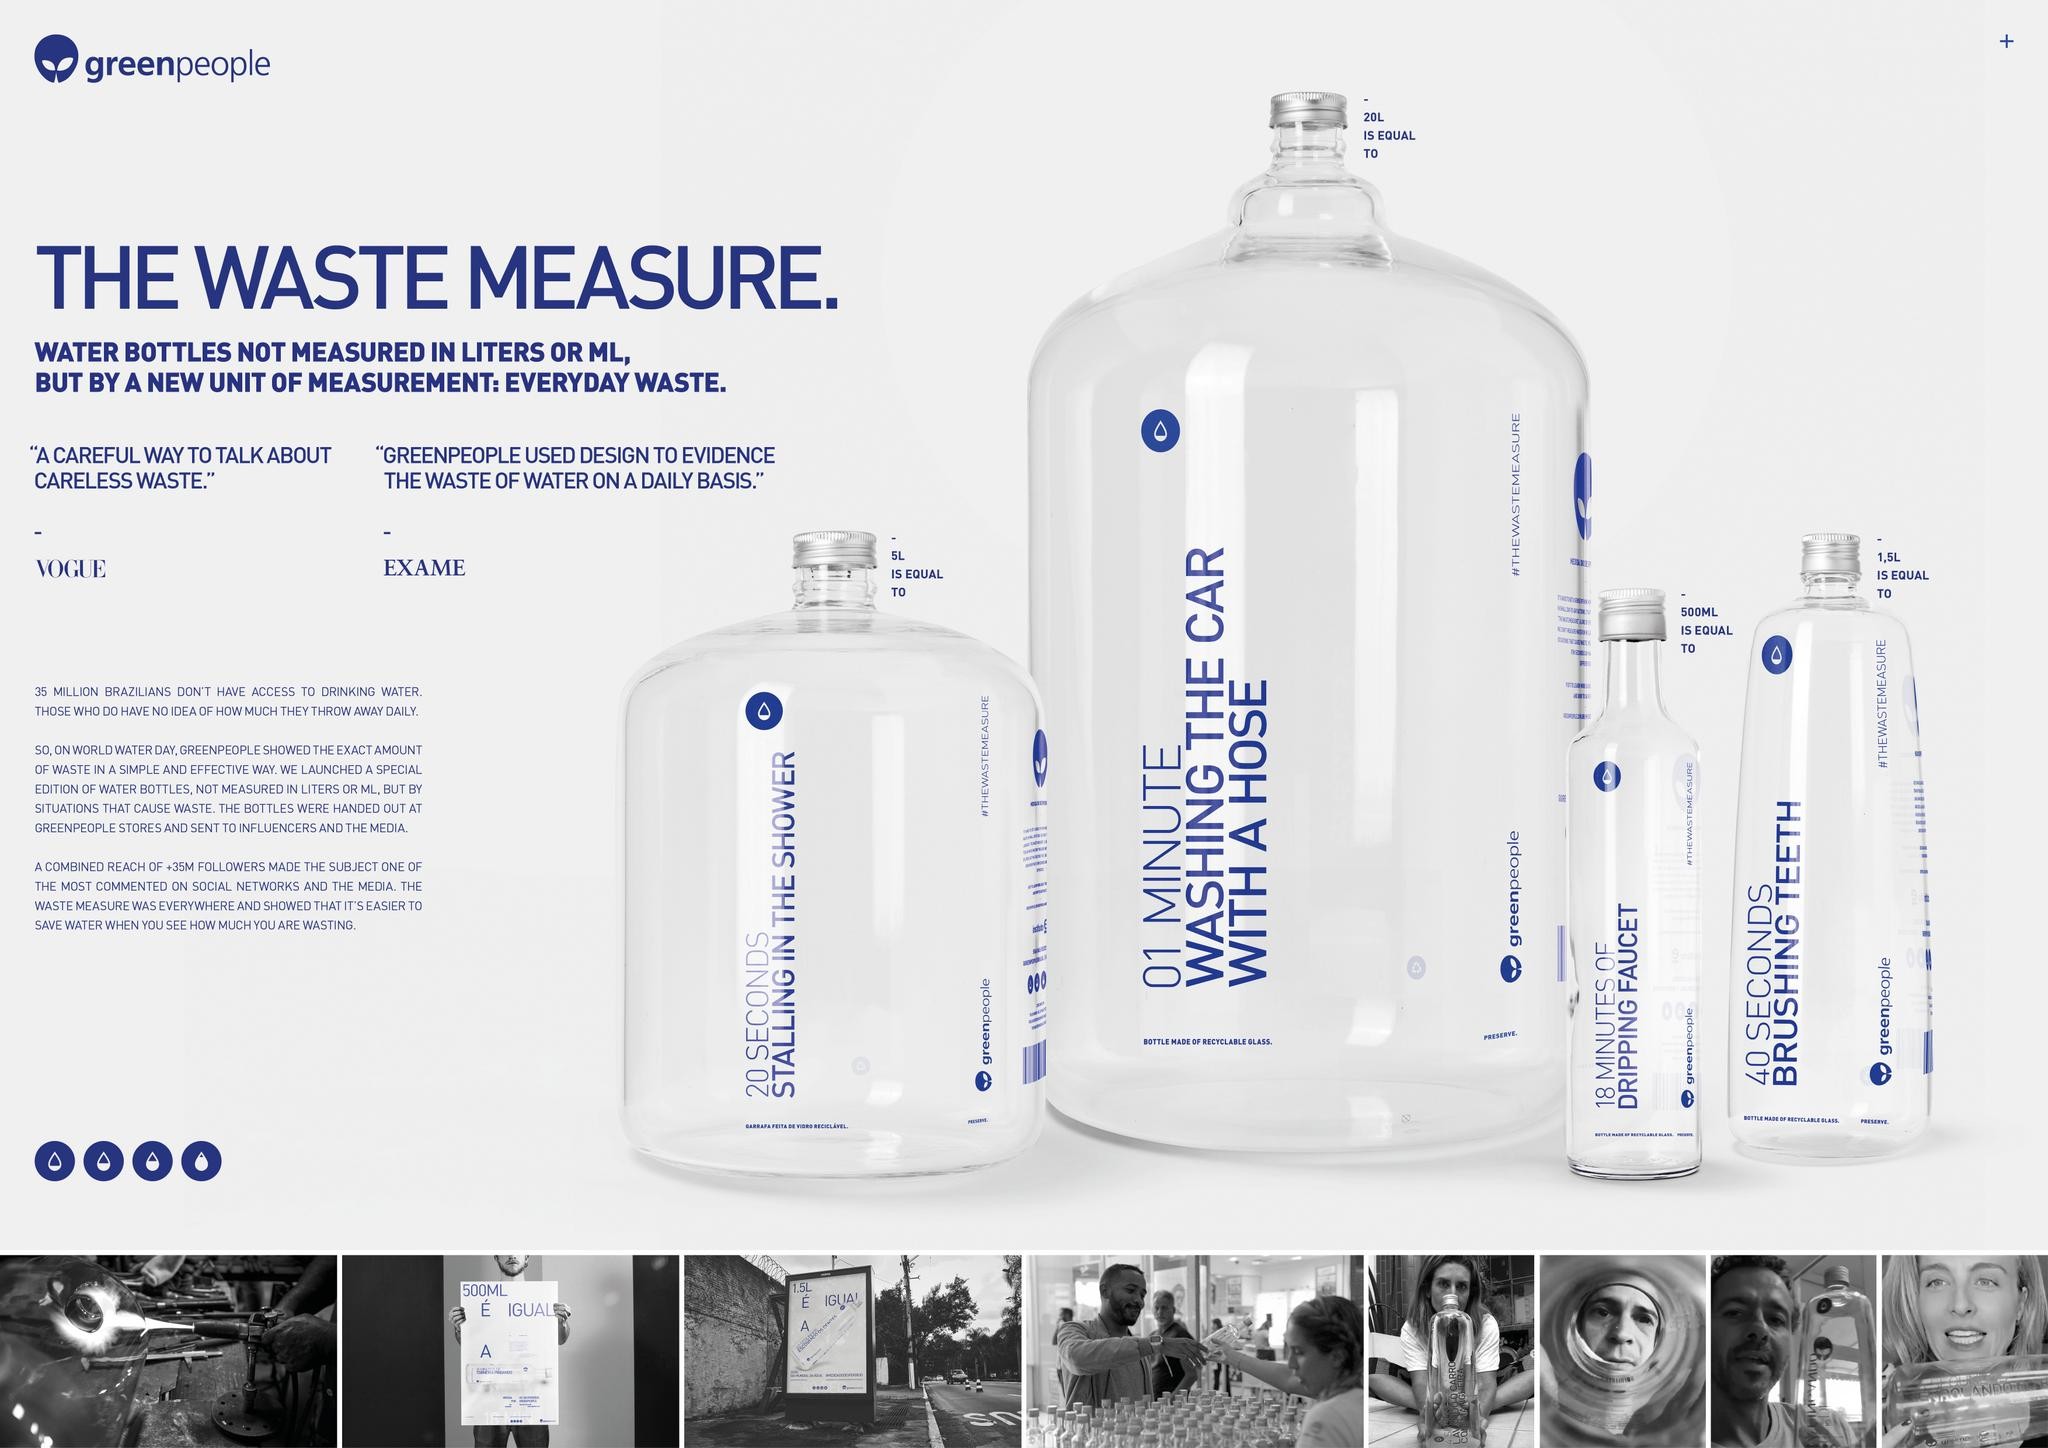 The Waste Measure